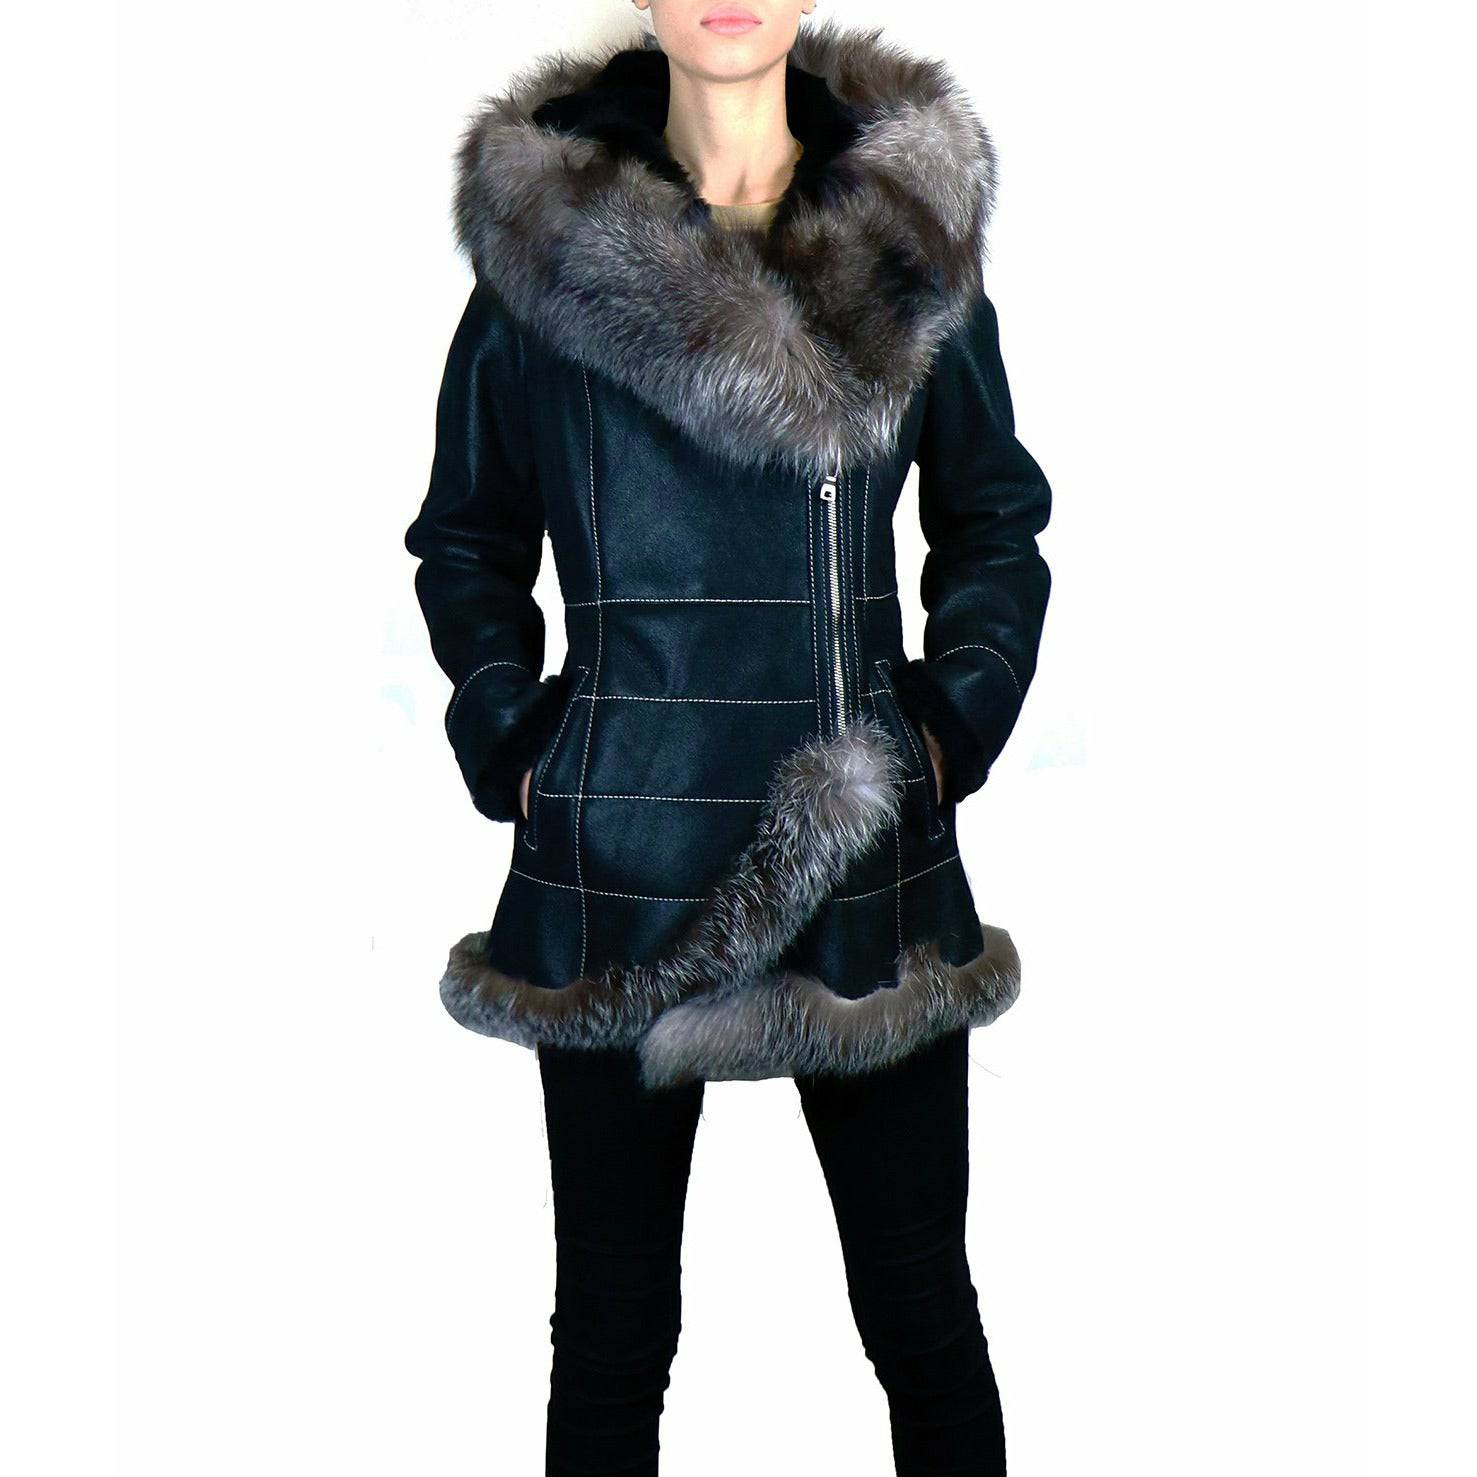 Zooloo Women's Shearling Coat with Fox Trimming - Zooloo Leather